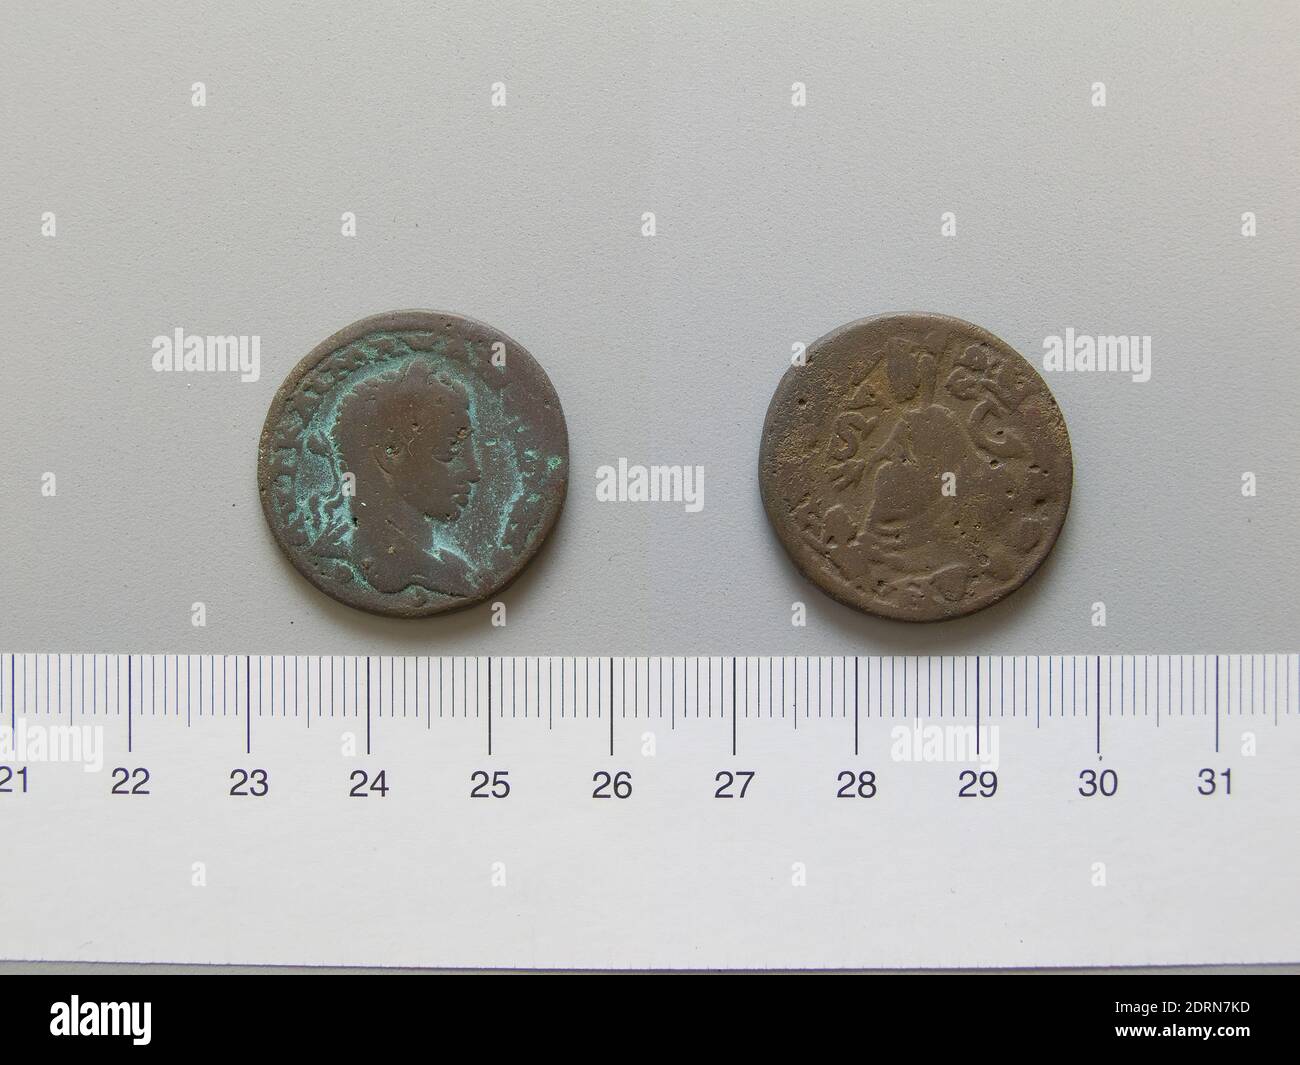 Ruler: Elagabalus, Emperor of Rome, ca. 203–222, ruled 218–22, Mint: Antioch, 1 As of Elagabalus, Emperor of Rome from Antioch, 218–22, copper, 9.40 g, 11:00, 26 mm, Made in Antioch, Seleucis and Pieria, Excavated in Dura-Europos, Roman, 3rd century, Numismatics Stock Photo